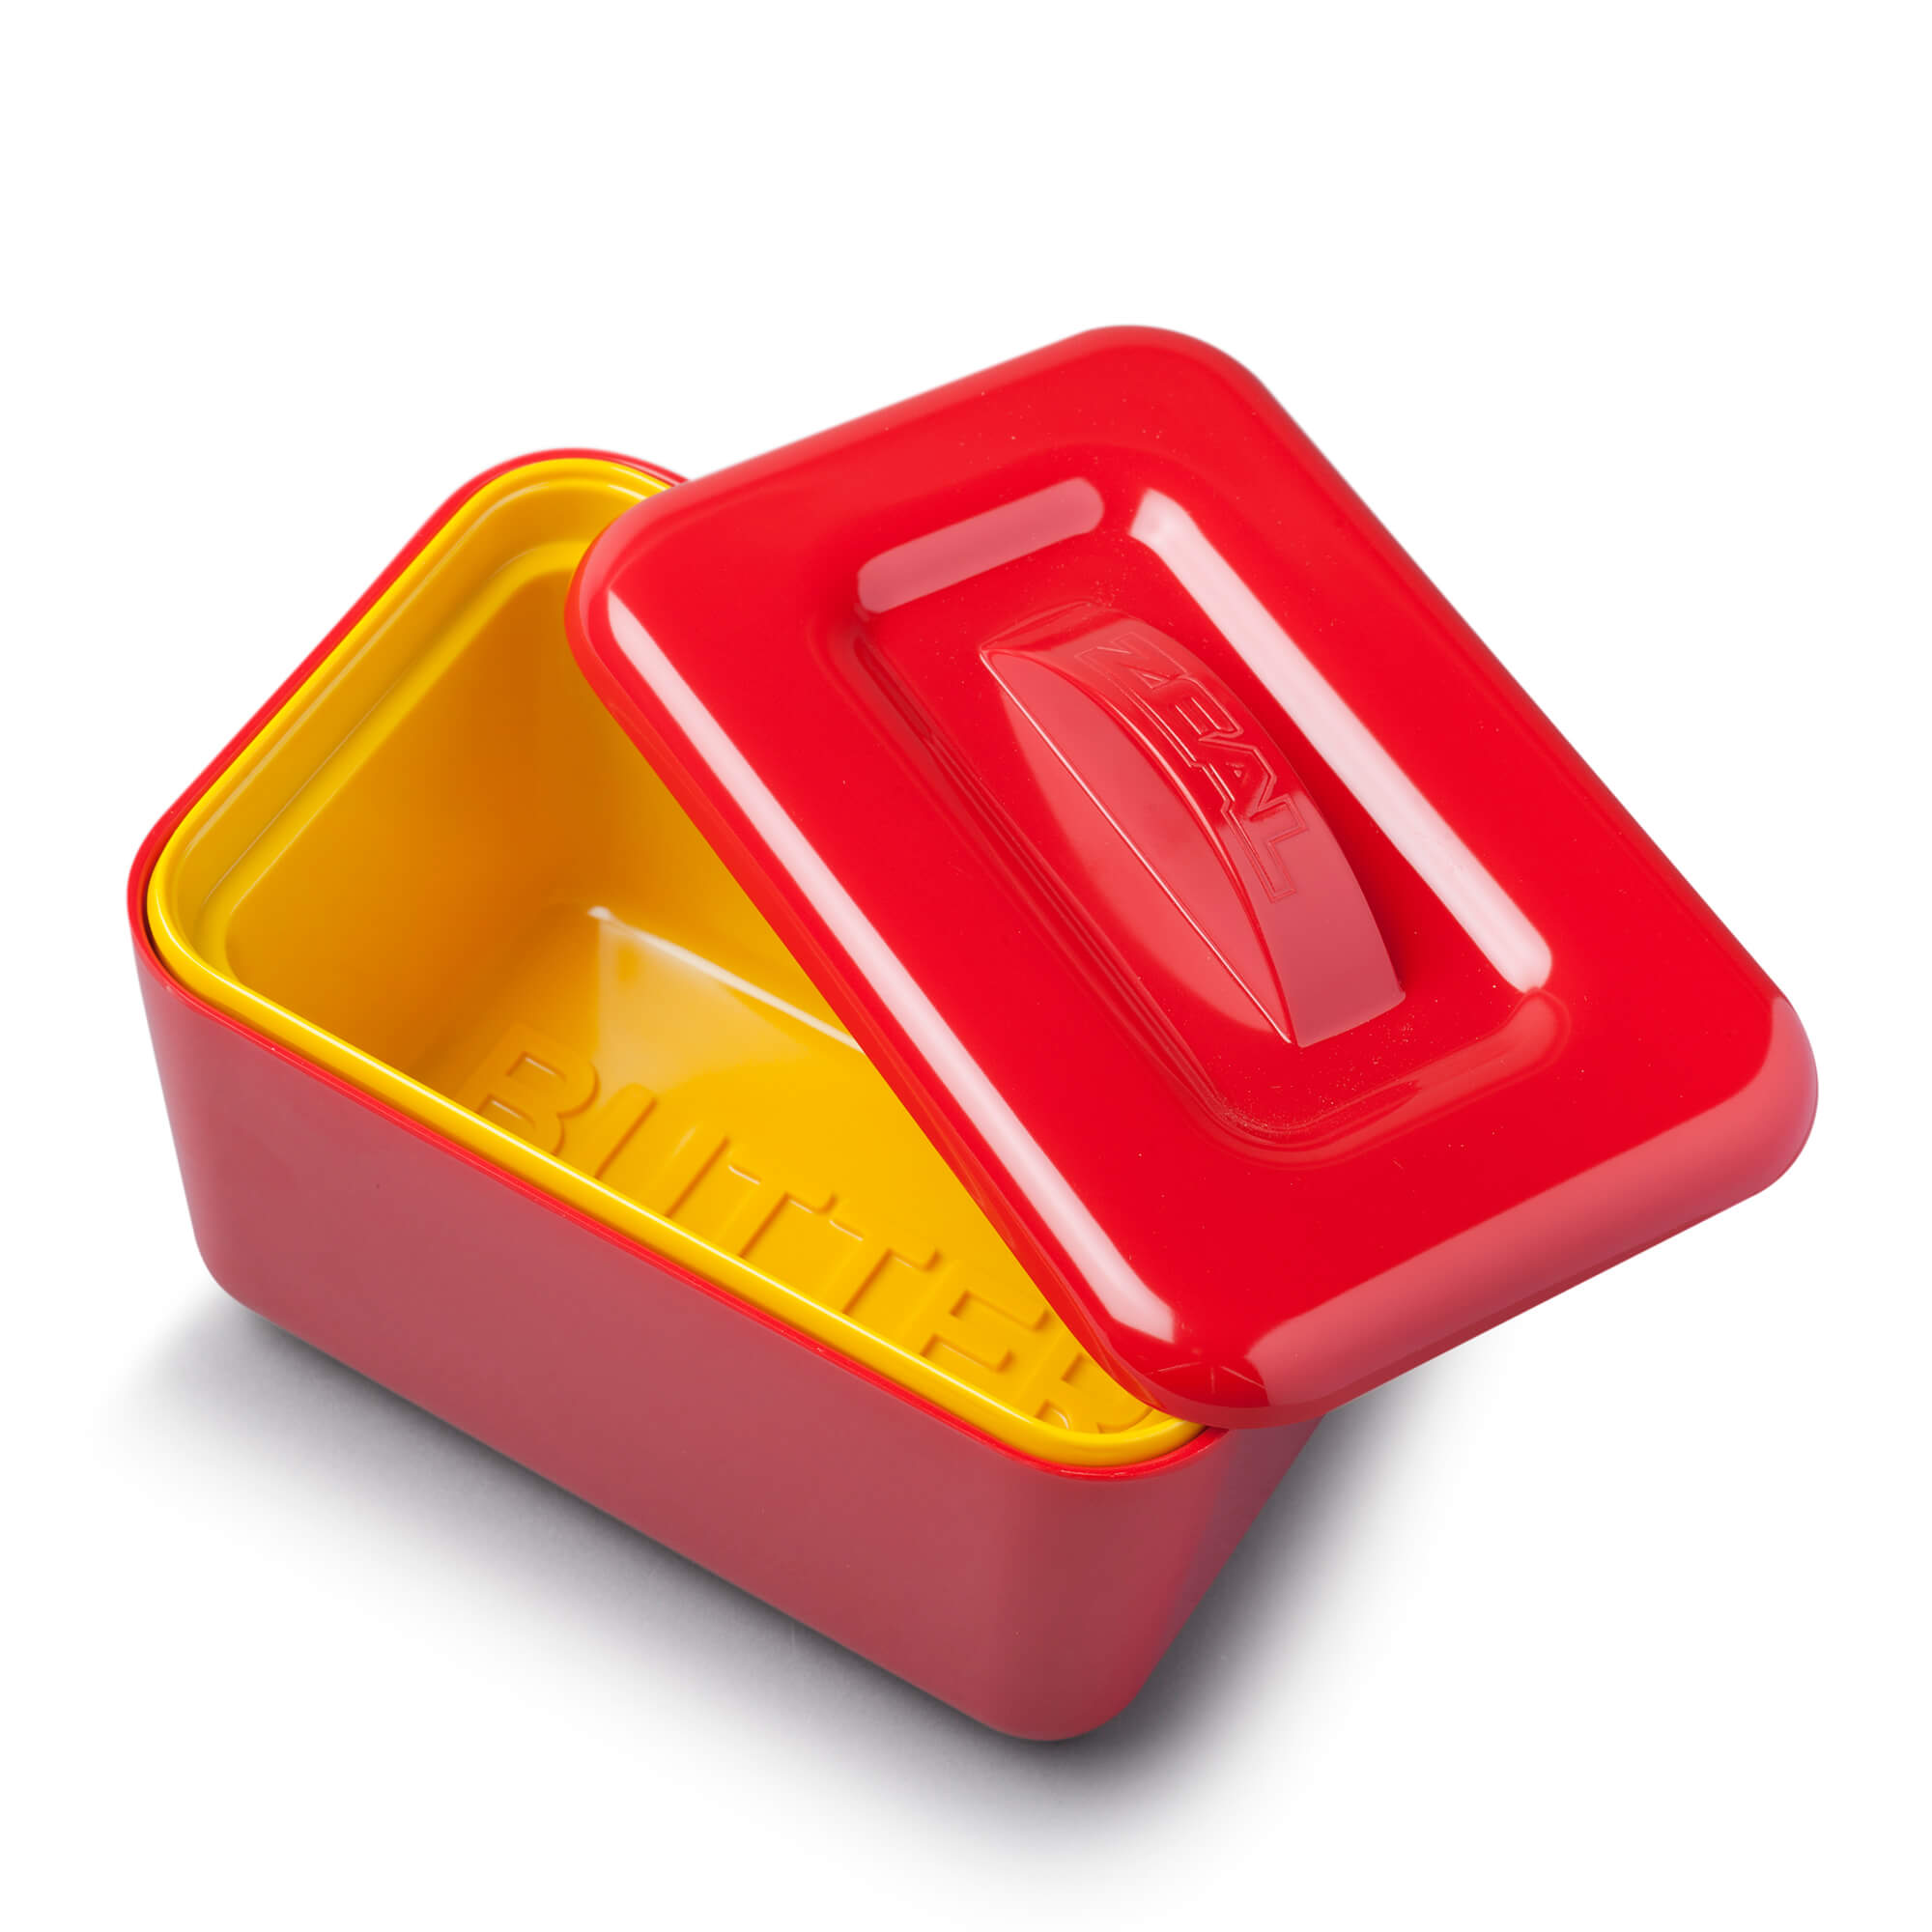 Inside of Red Melamine Butter Dish by Zeal